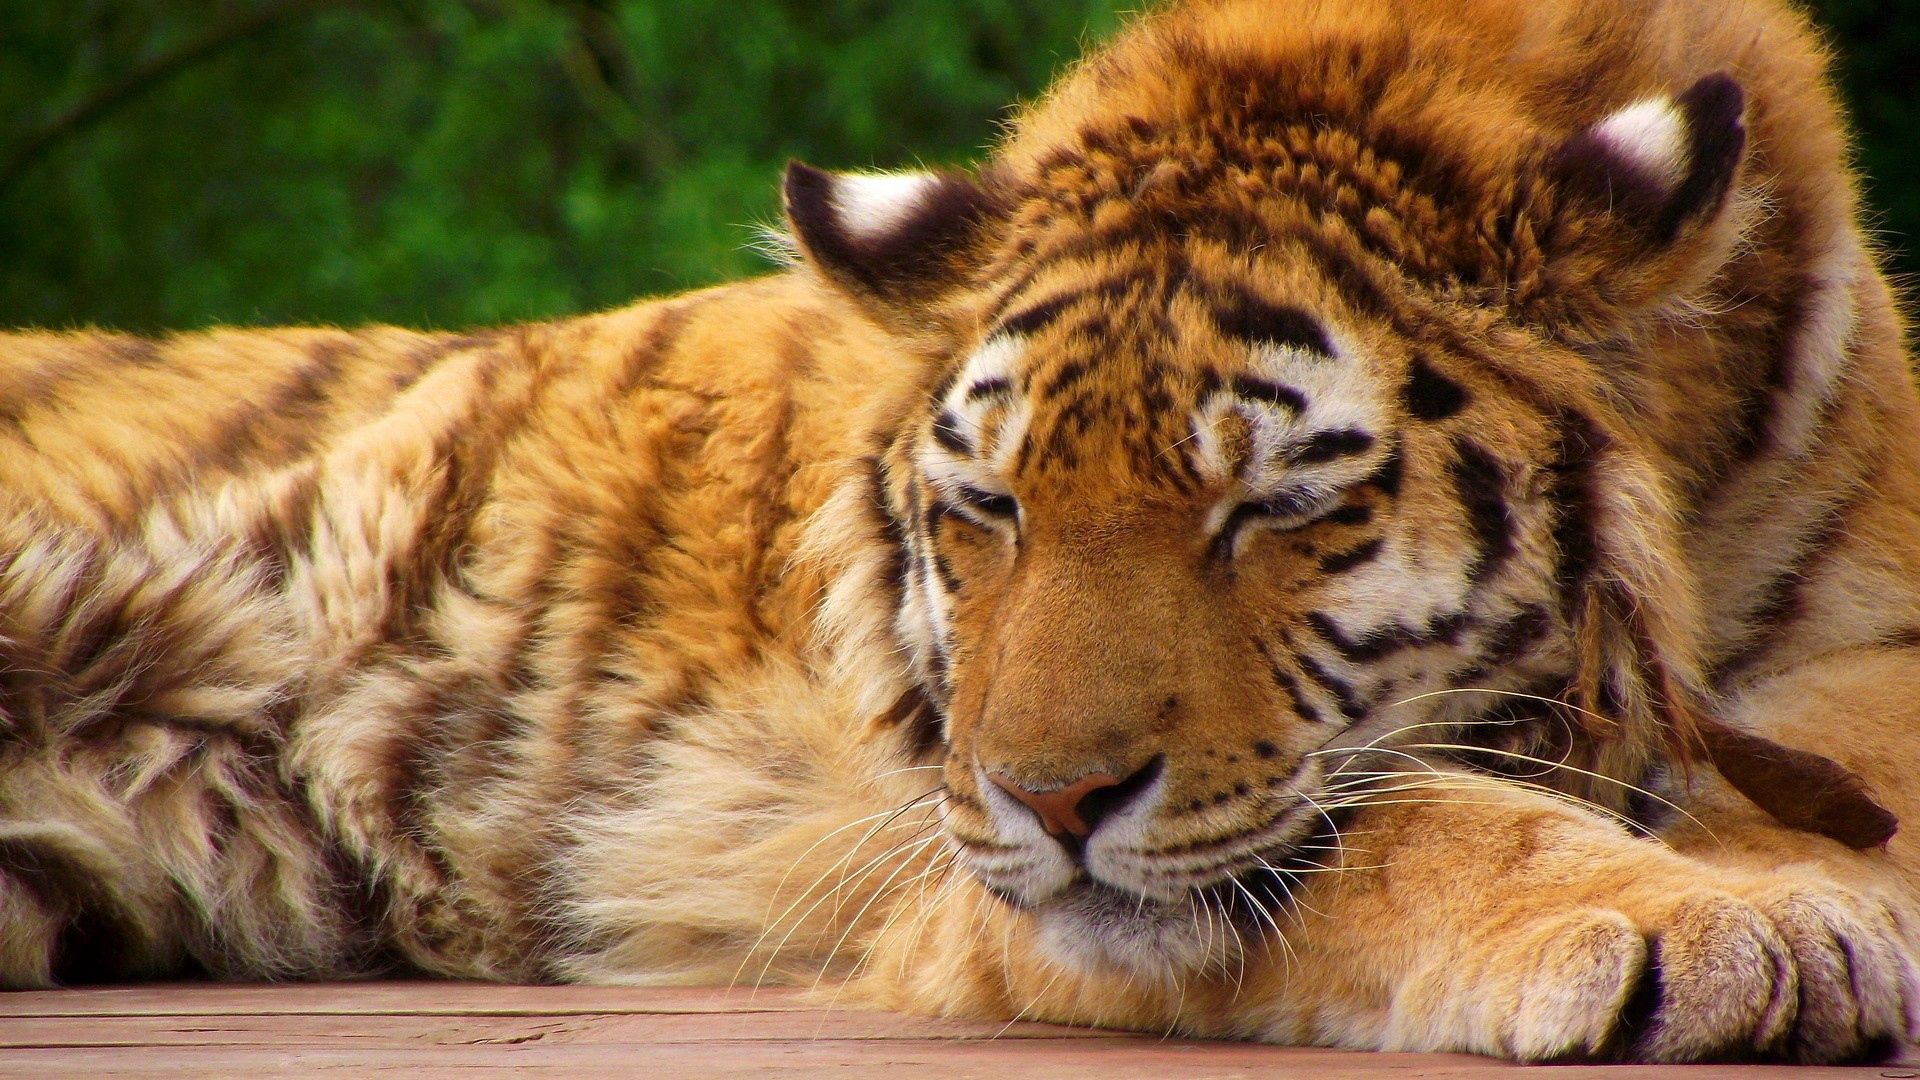 big cat, animals, muzzle, striped, relaxation, rest, tiger